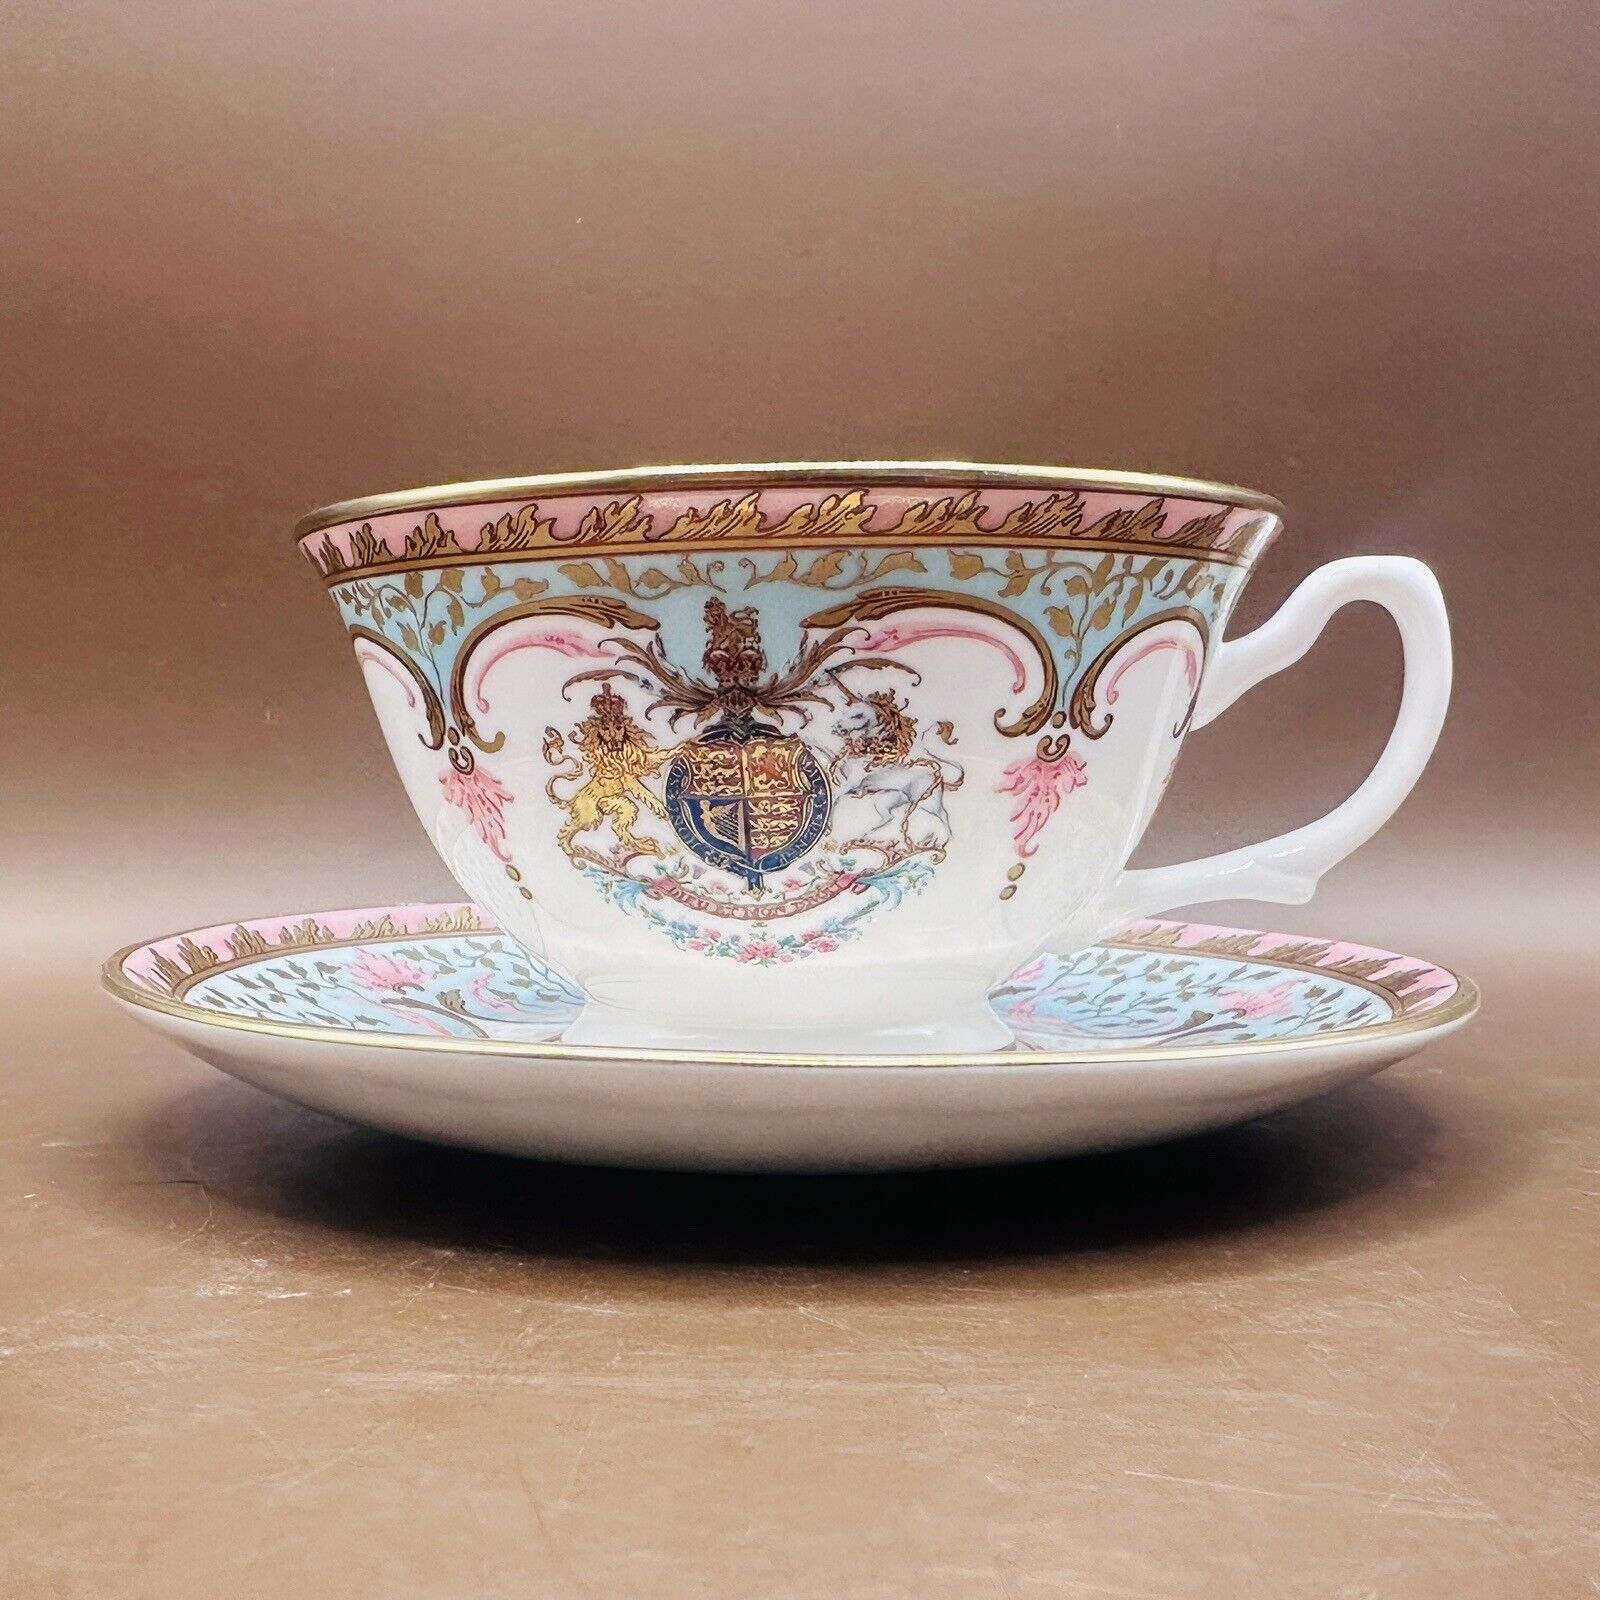 The Royal collection bone china teacup&saucer Queen Elizebeth II 80th Birthday